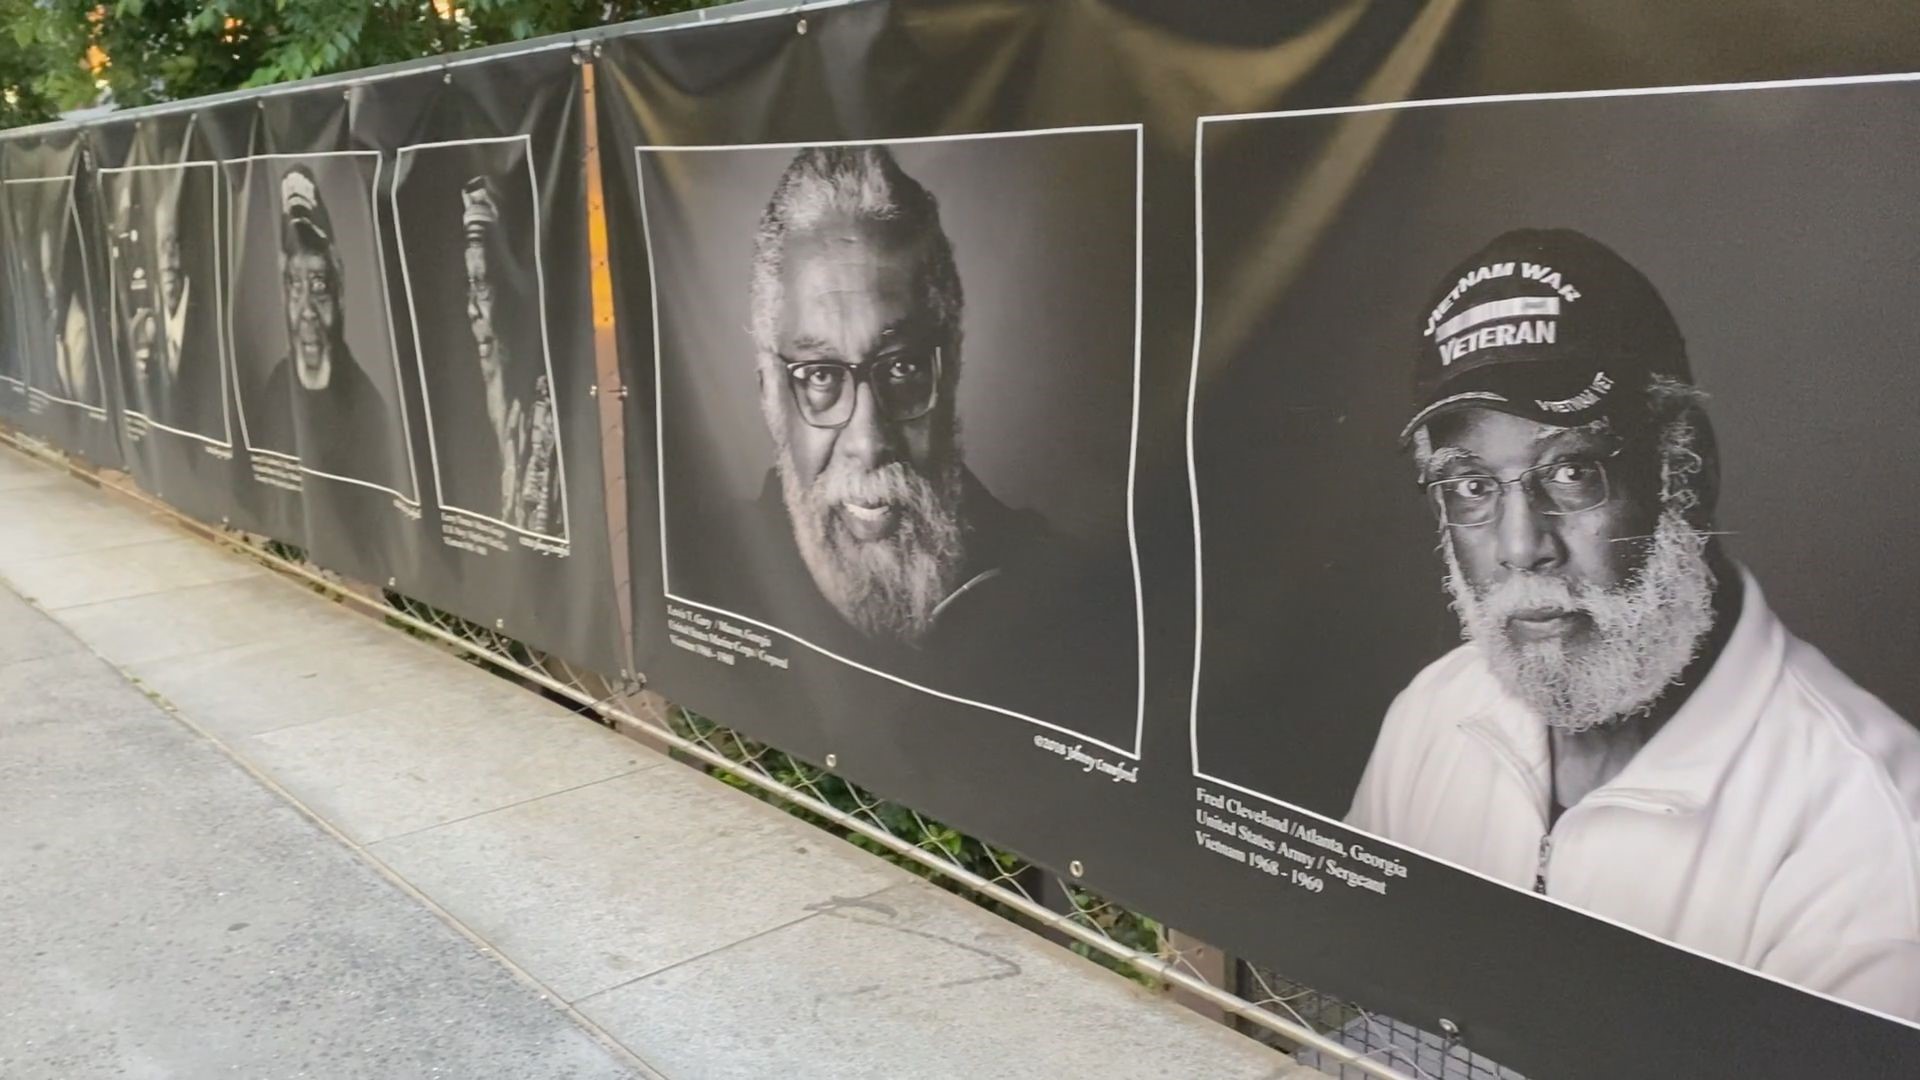 A photographer created the Vietnam black soldier's portrait project highlighting Georgia veterans. The portrait exhibit made a stop in Macon, and now in Atlanta.